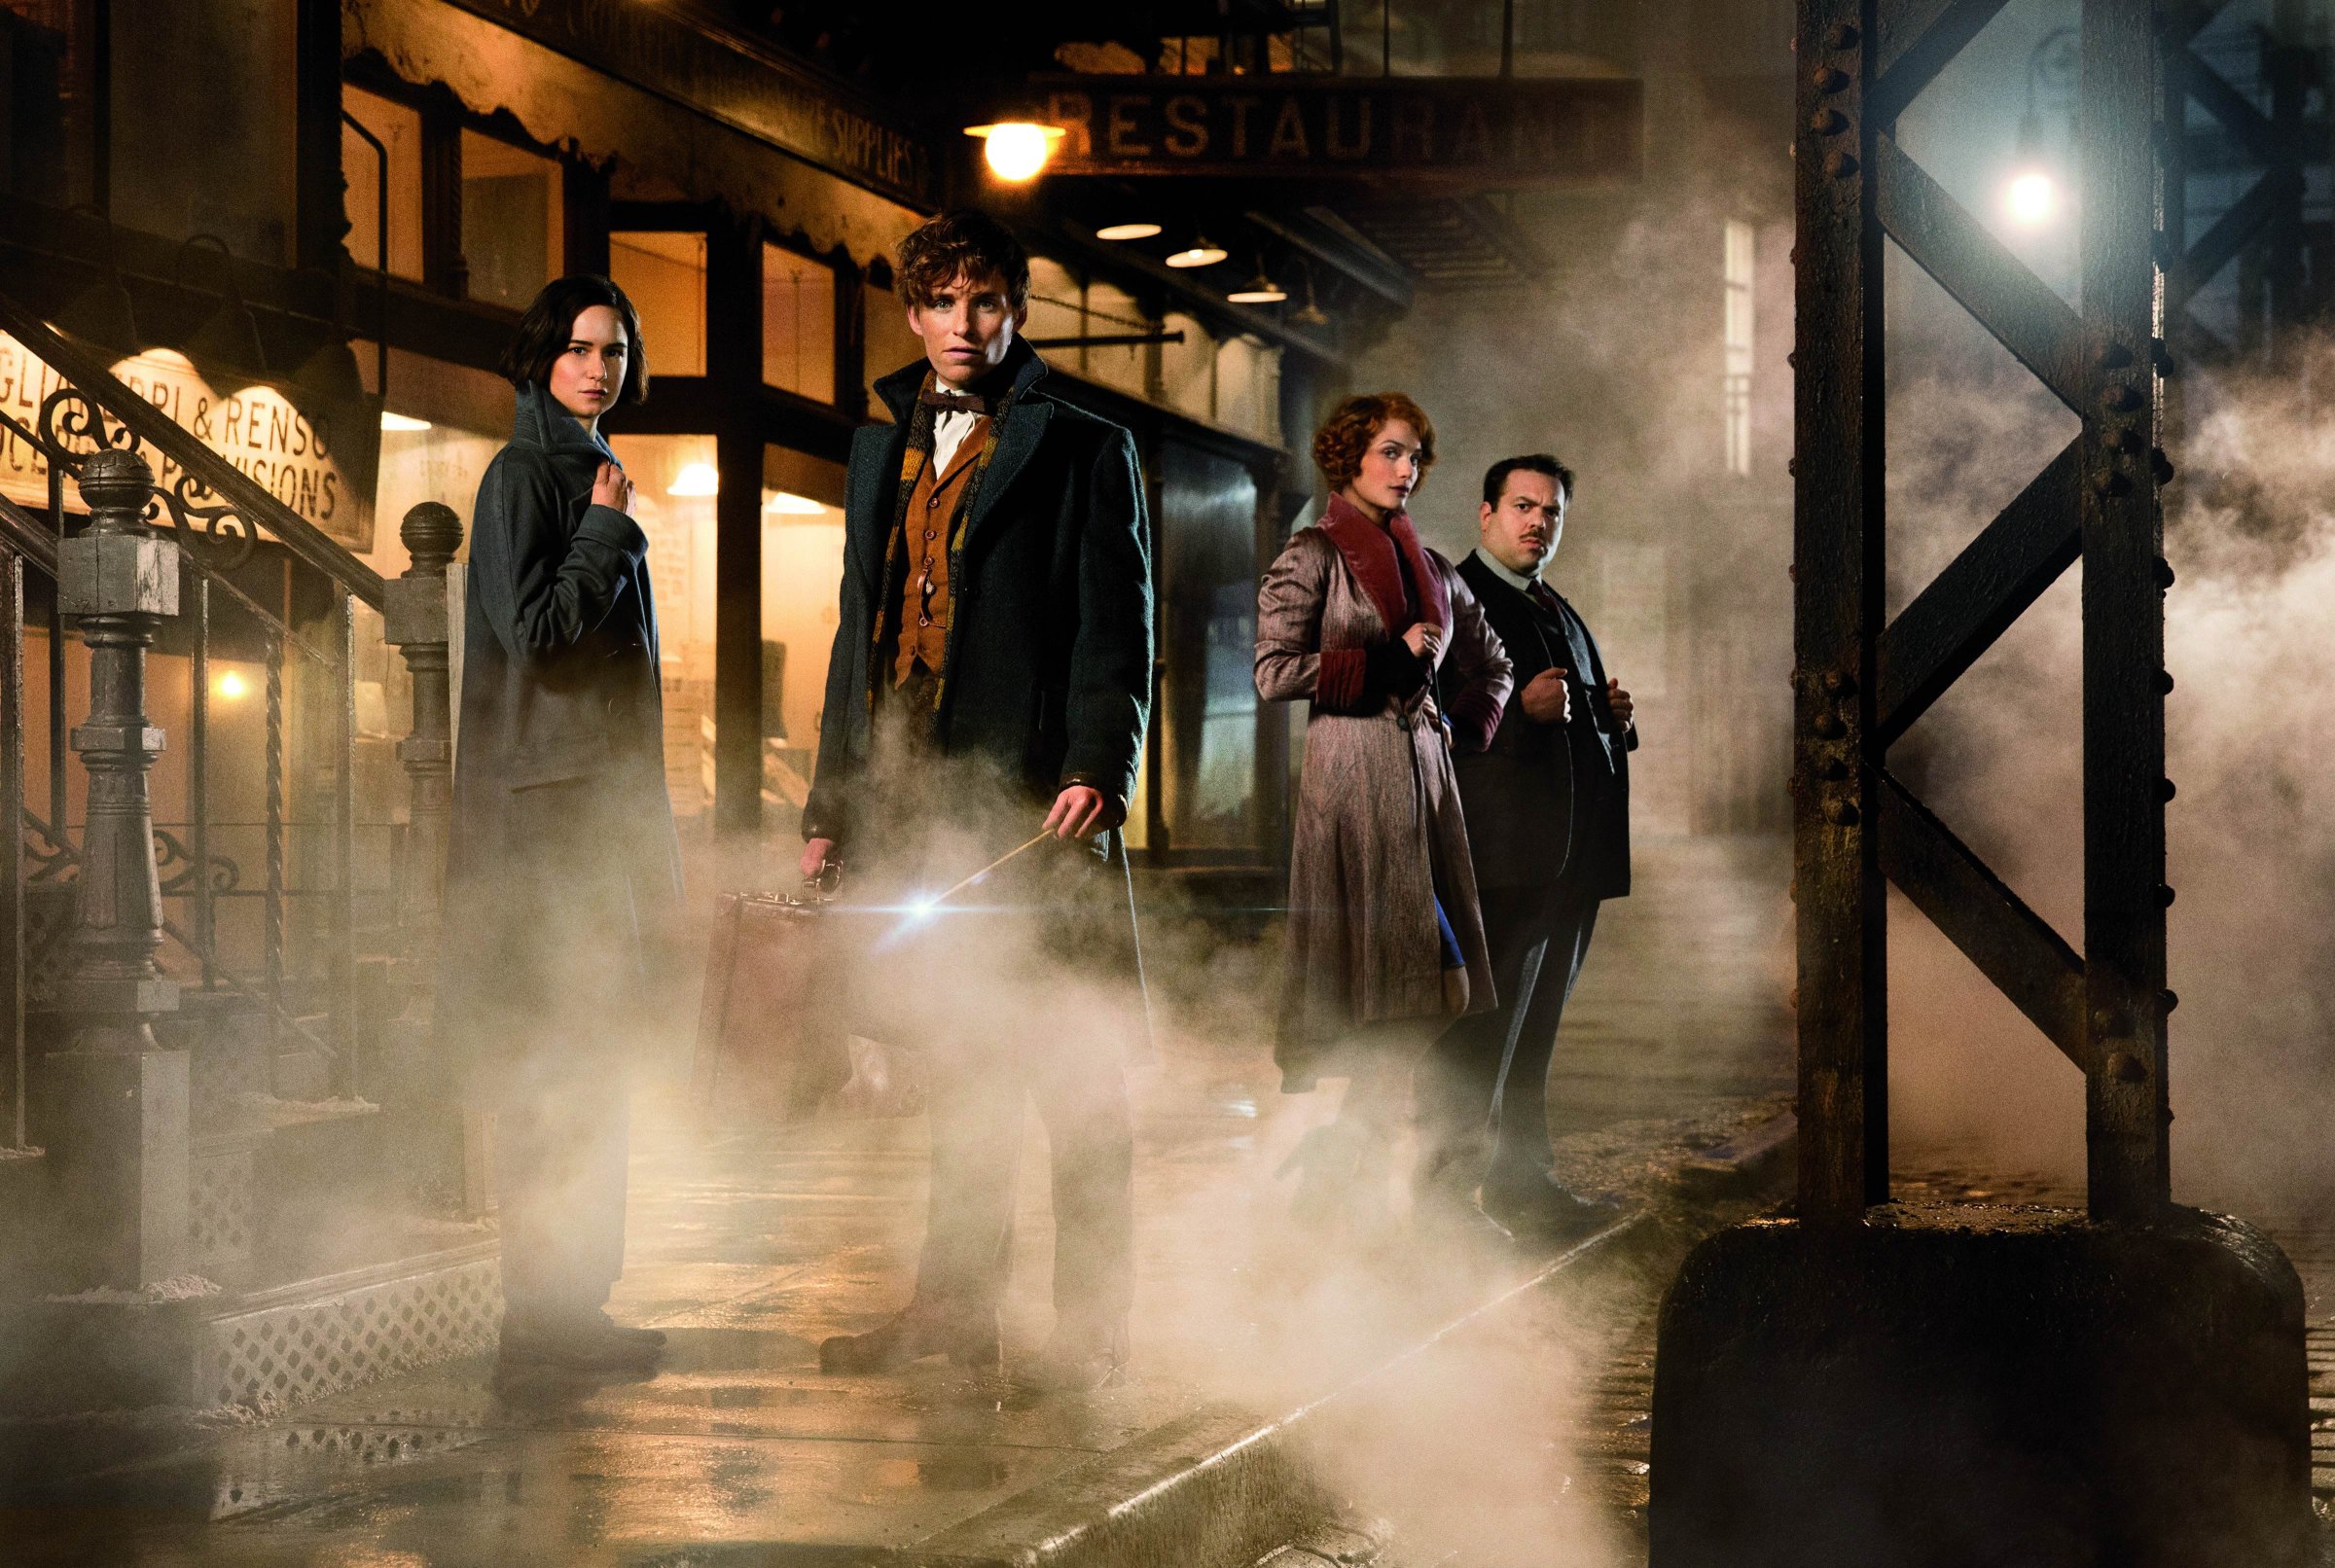 Katherine Waterston as Tina, Eddie Redmayne as Newt Scamander, AIison Sudol as Queenie and Dan Fogler as Jacob in Warner Bros. Pictures' fantasy adventure "Fantastic Beasts and Where to Find Them."